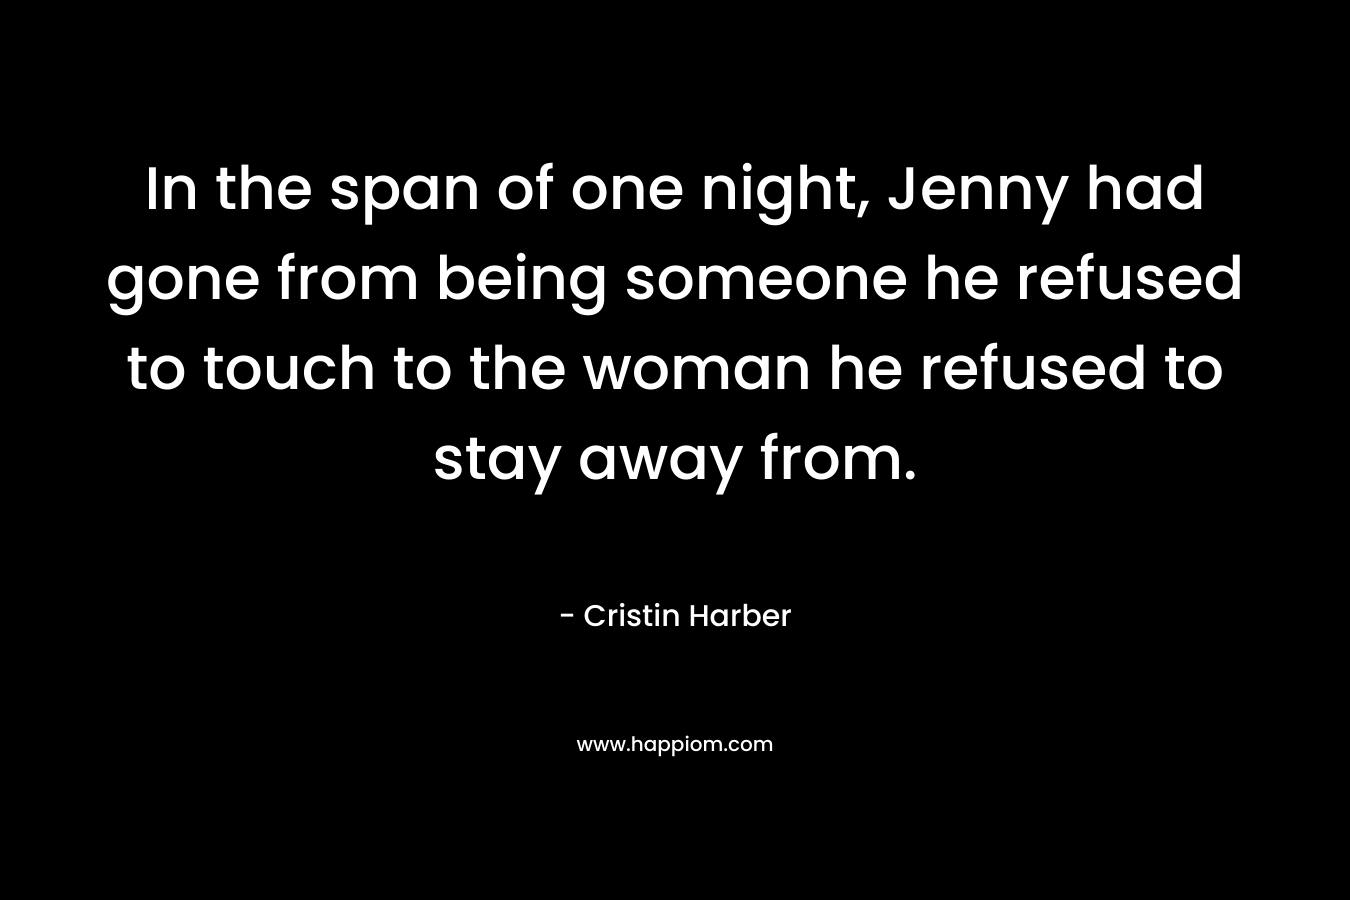 In the span of one night, Jenny had gone from being someone he refused to touch to the woman he refused to stay away from. – Cristin Harber